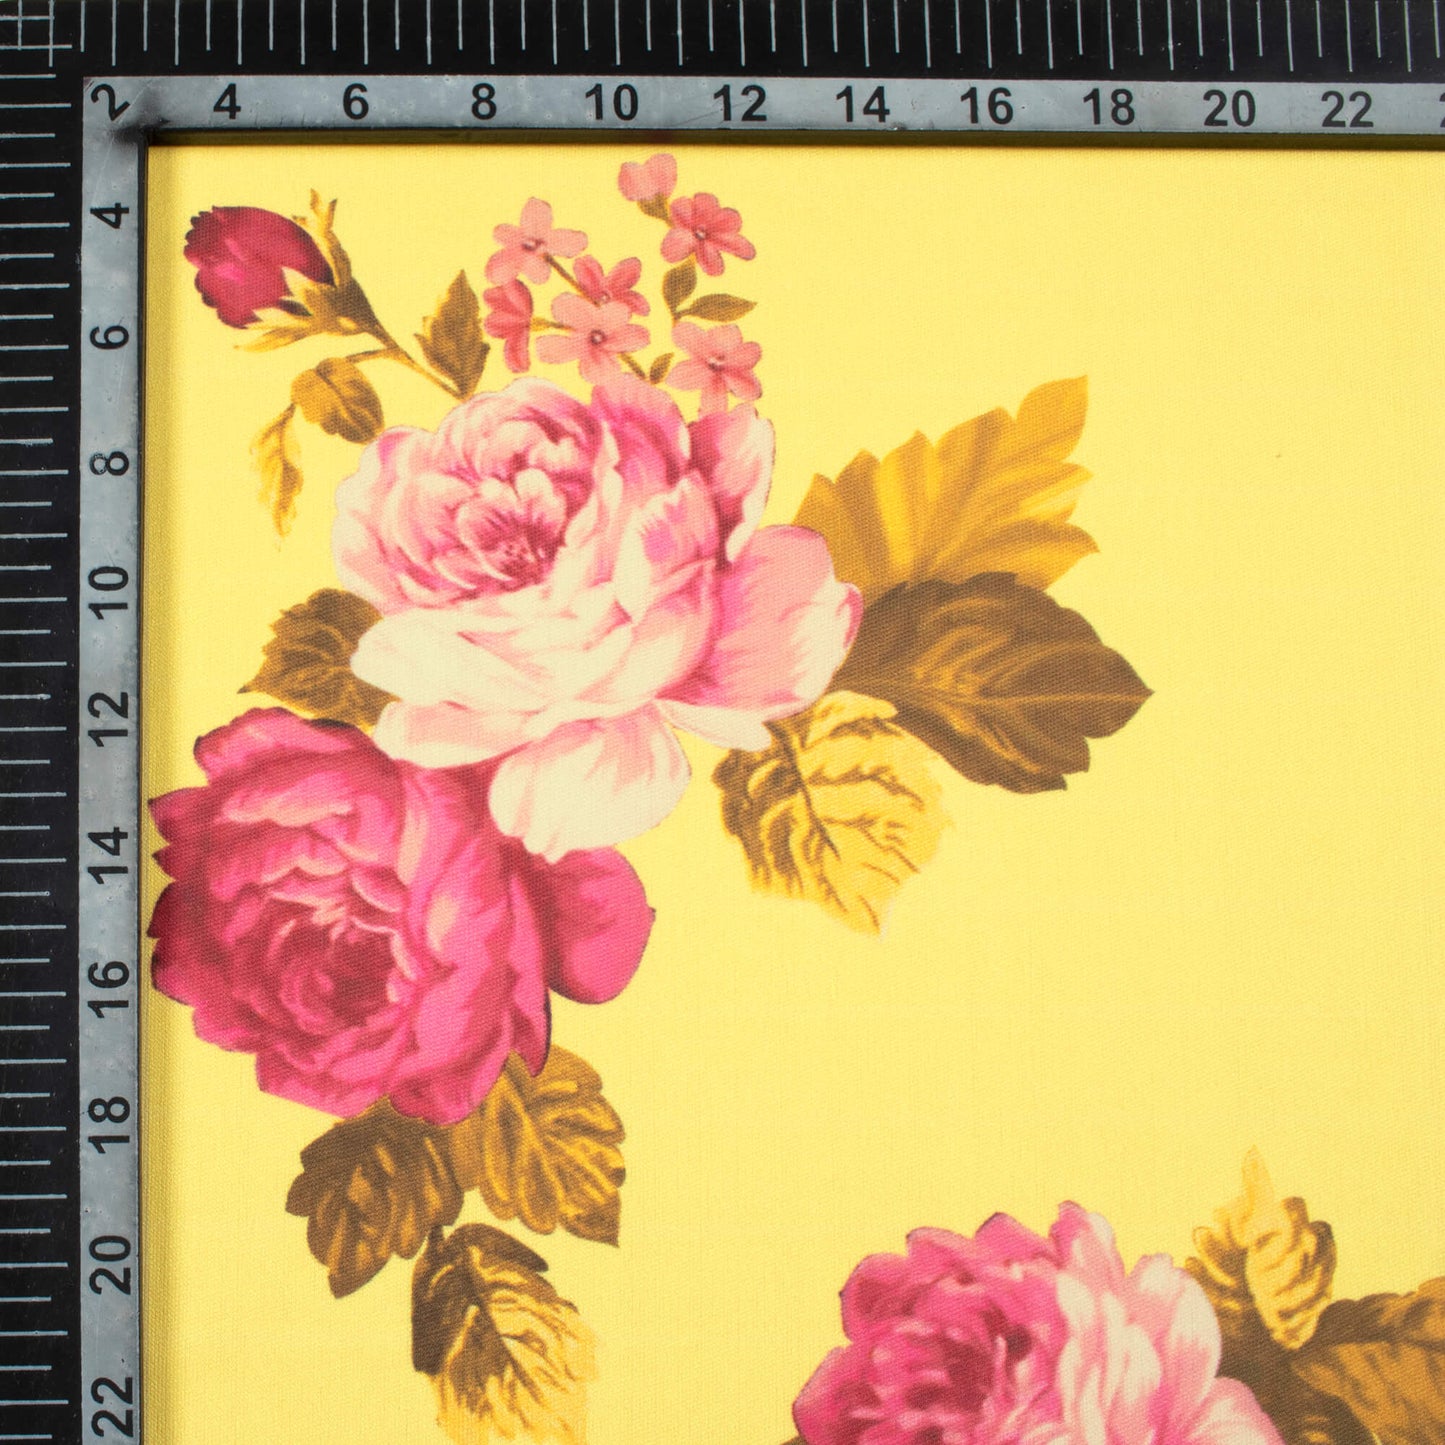 Royal Yellow And Hippie Pink Floral  Pattern Digital Print Lycra Fabric (Width 58 Inches)